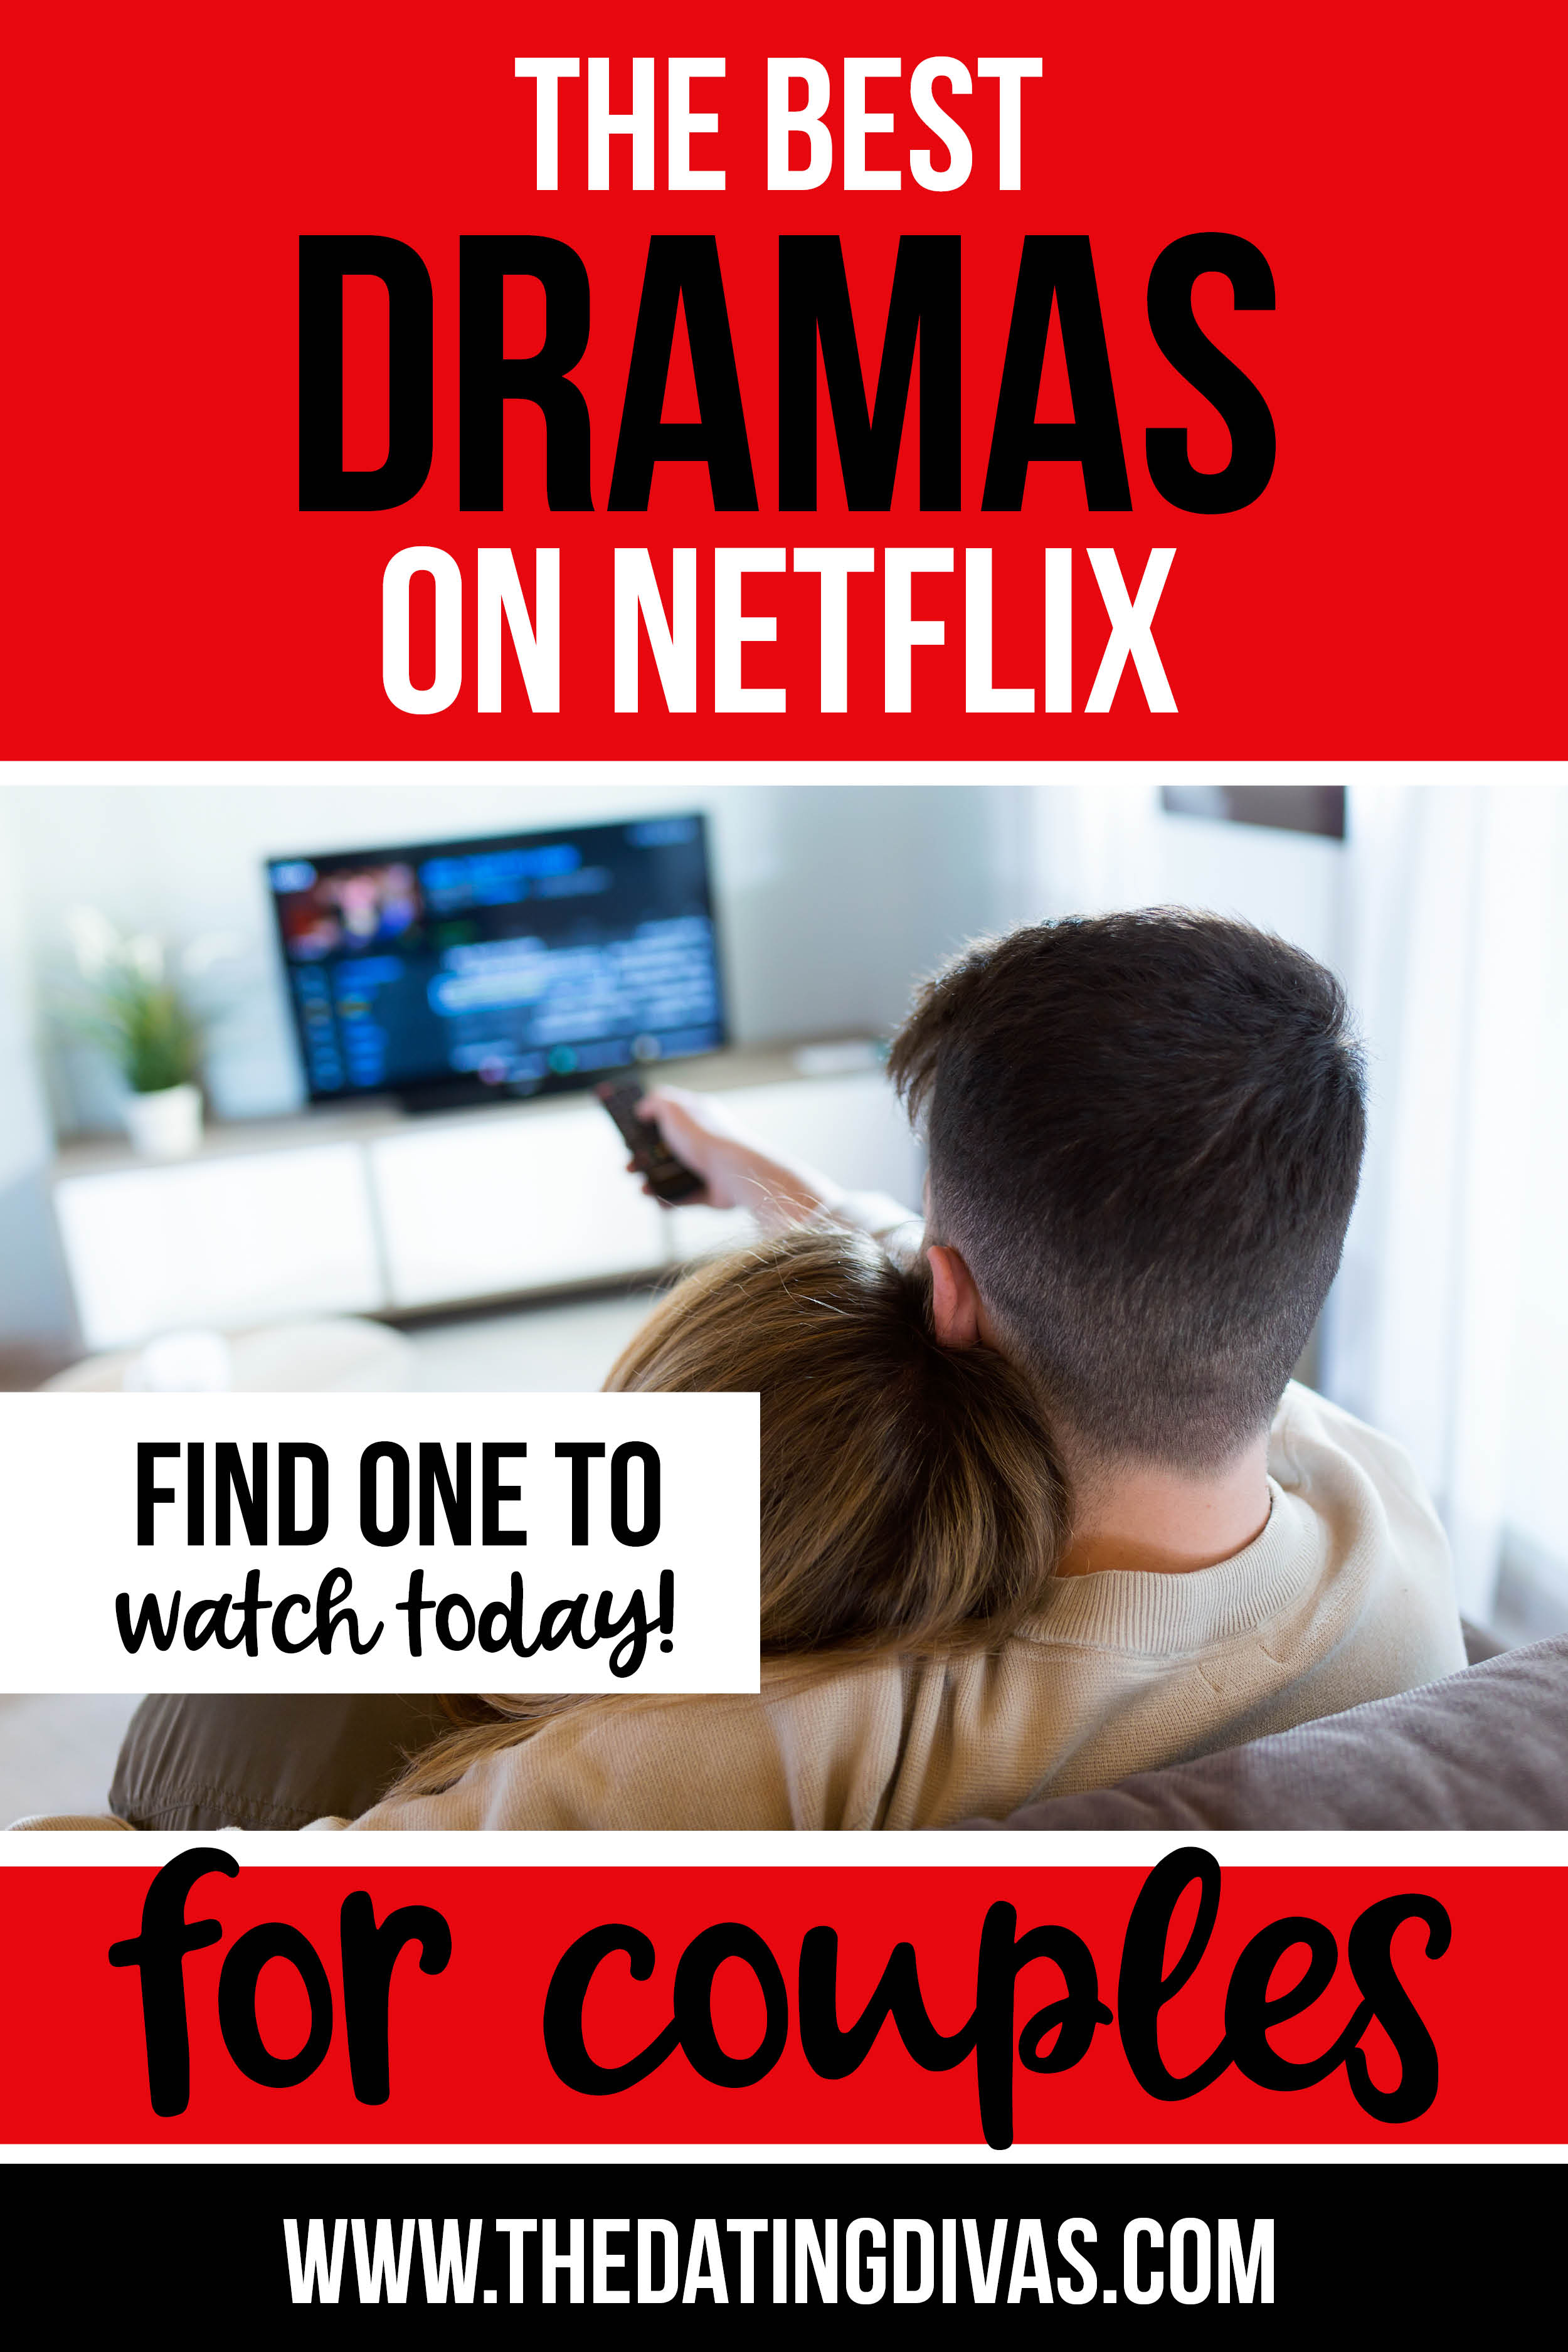 The very best TV show dramas on Netflix - all in one place! If you are looking for good drama shows on Netflix check these out! They have the best drama series ideas for your next Netflix binge! #netflixdrama #tvdrama #netflixshows 